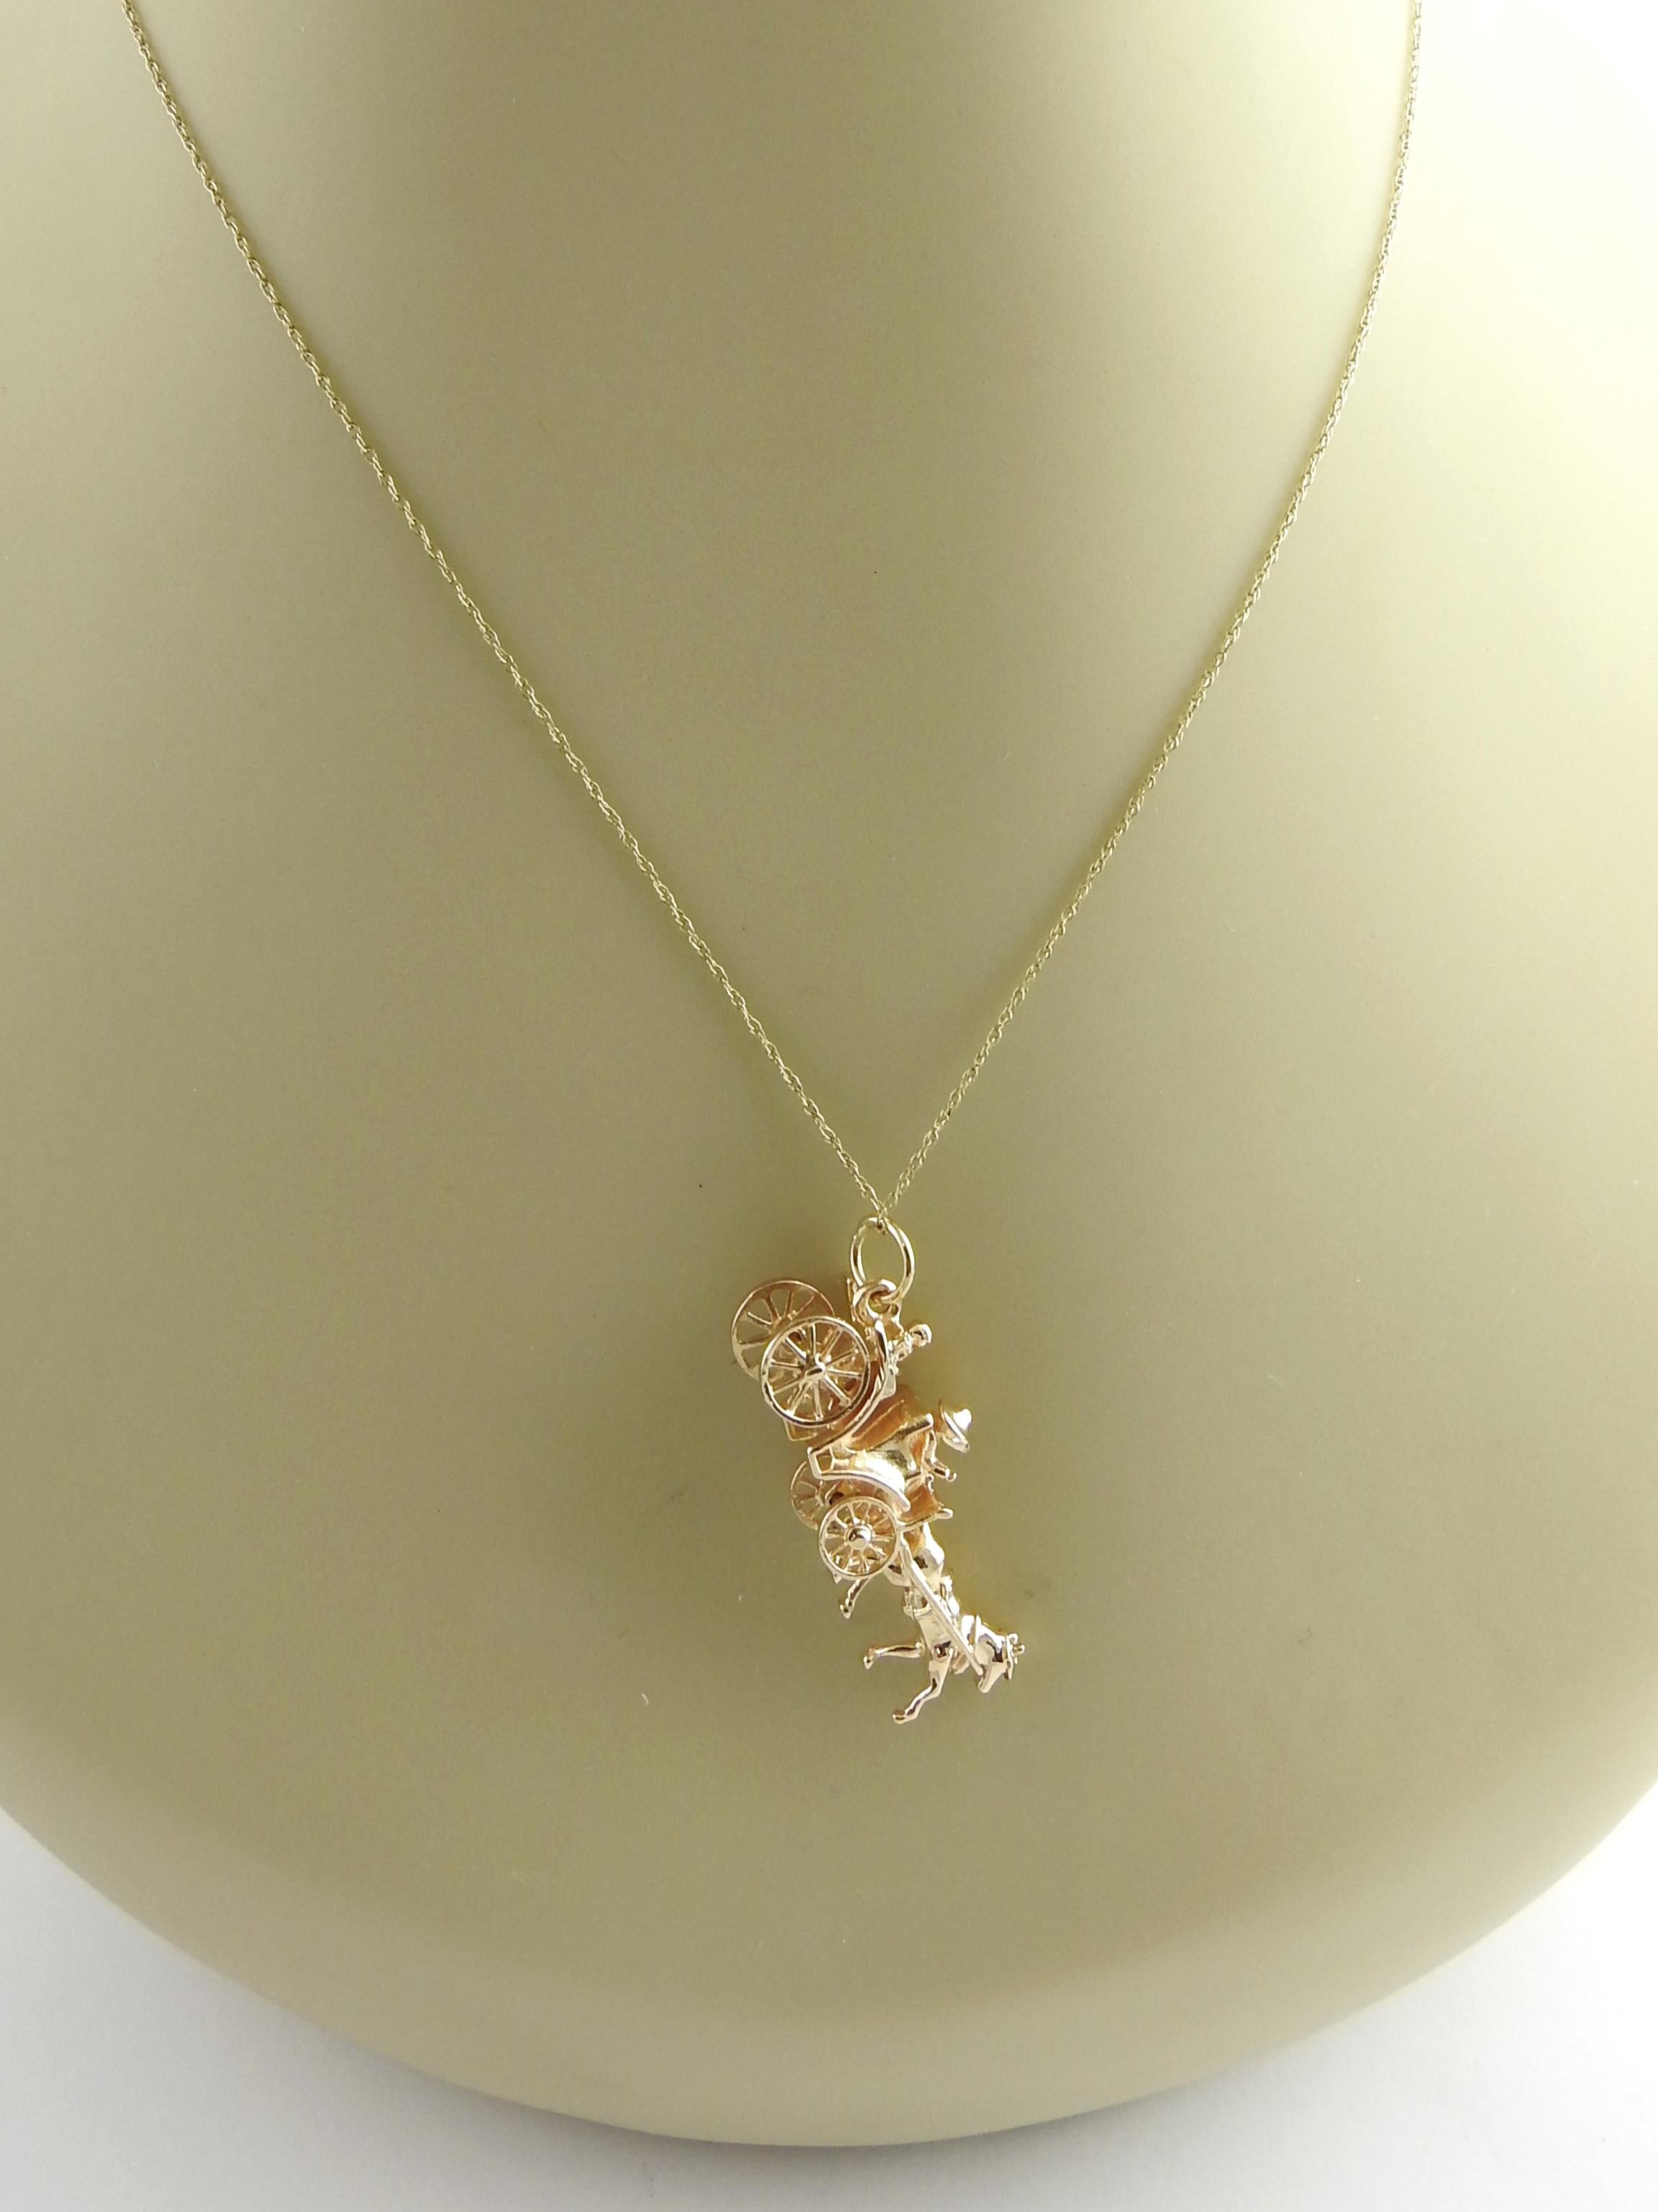 14 Karat Yellow Gold Horse and Carriage Charm 6